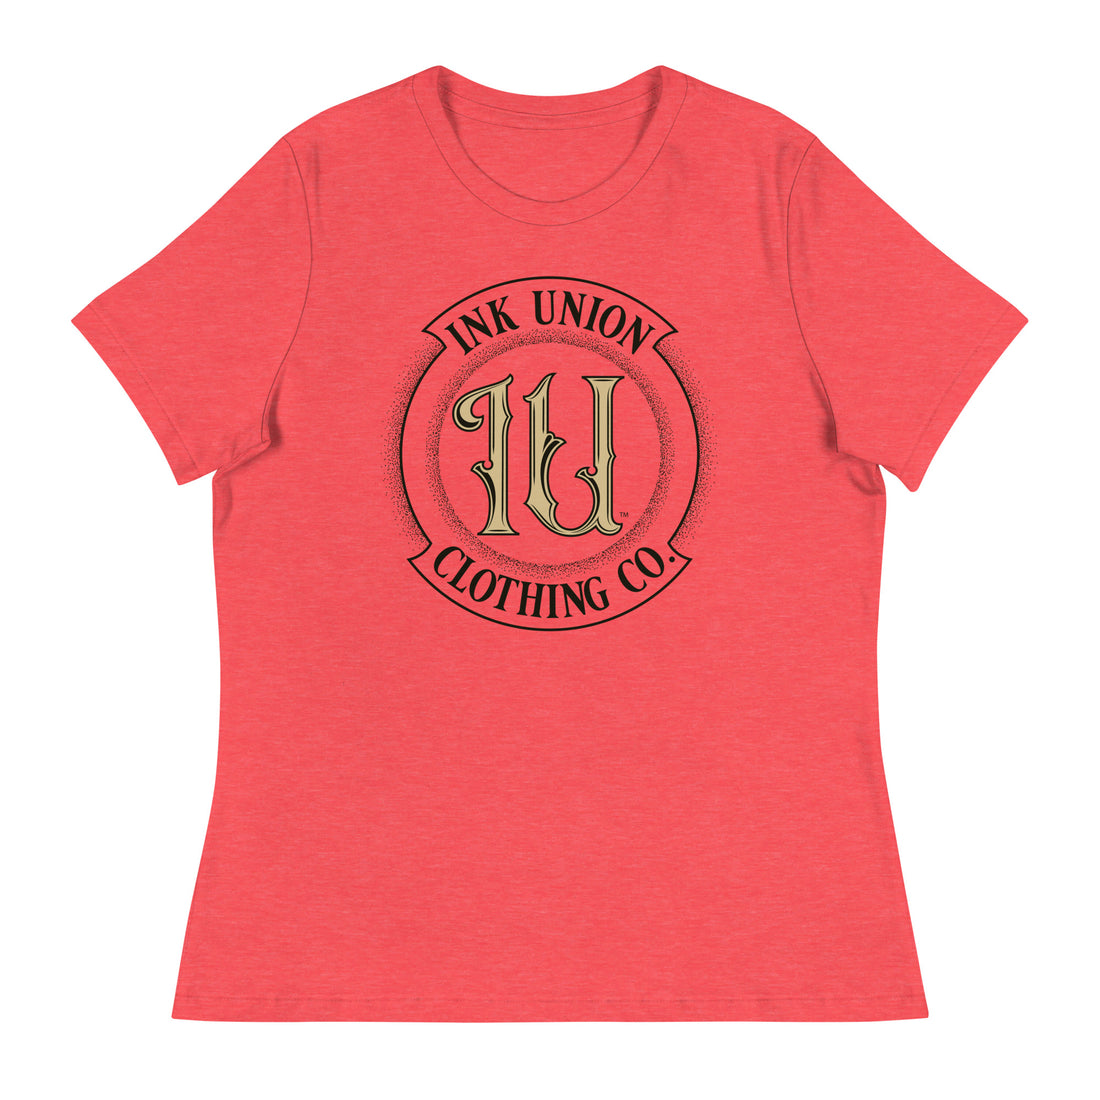 A heather red t-shirt with the Ink Union Clothing Co Badge logo in black and gold centered on the front of the shirt.